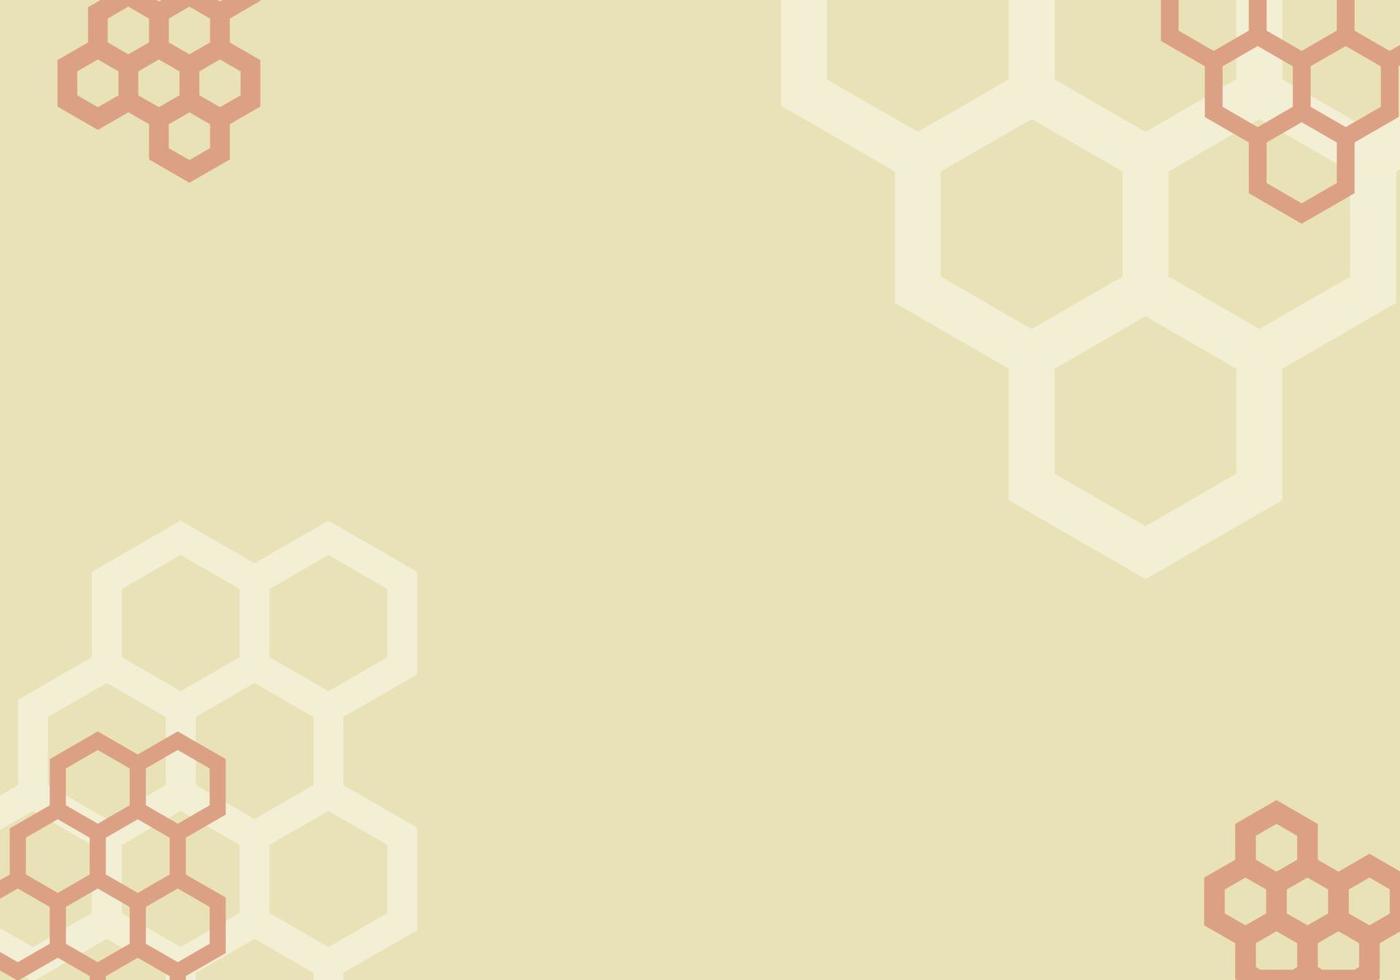 background with hexagons pattern vector